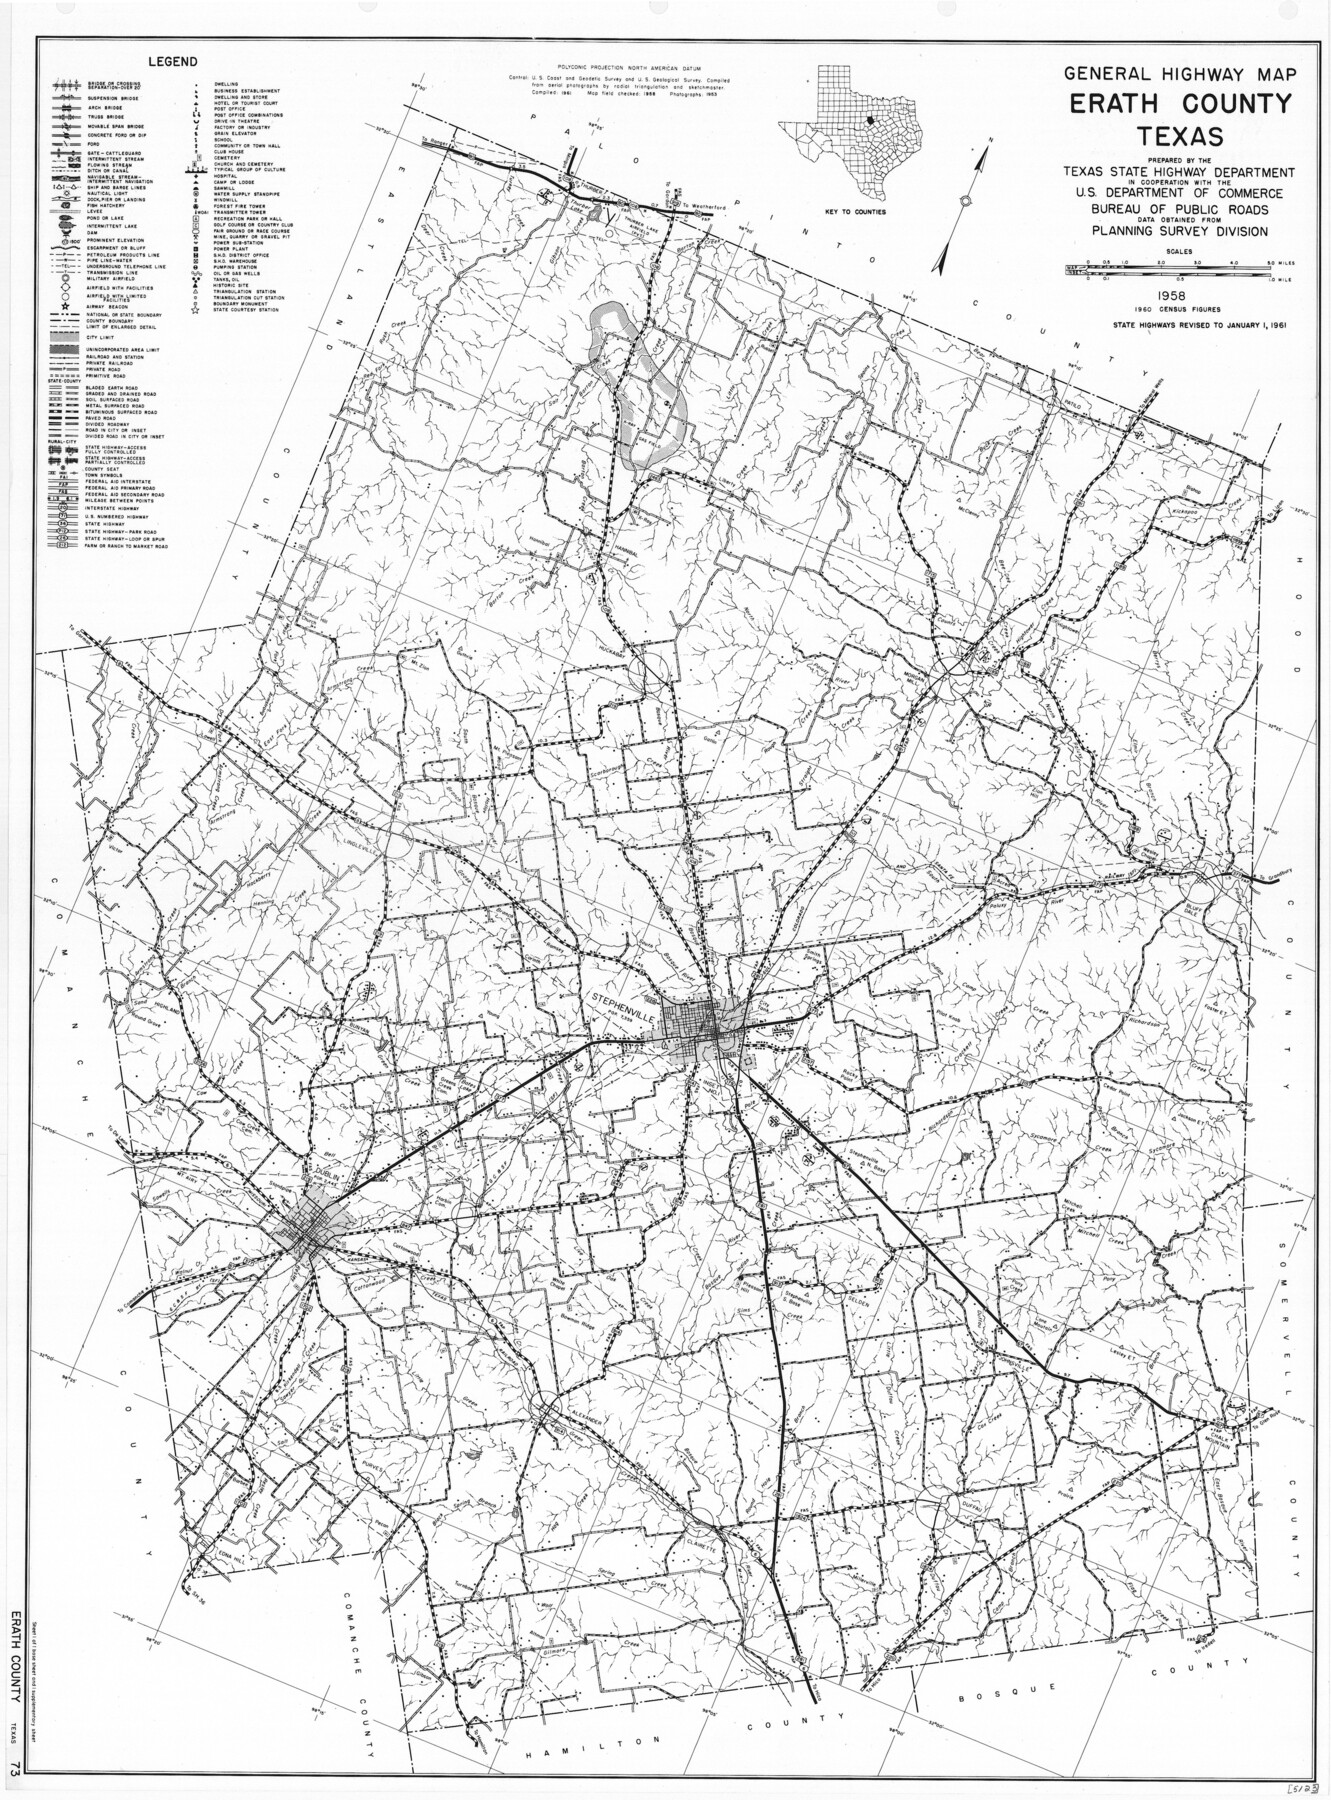 79460, General Highway Map, Erath County, Texas, Texas State Library and Archives